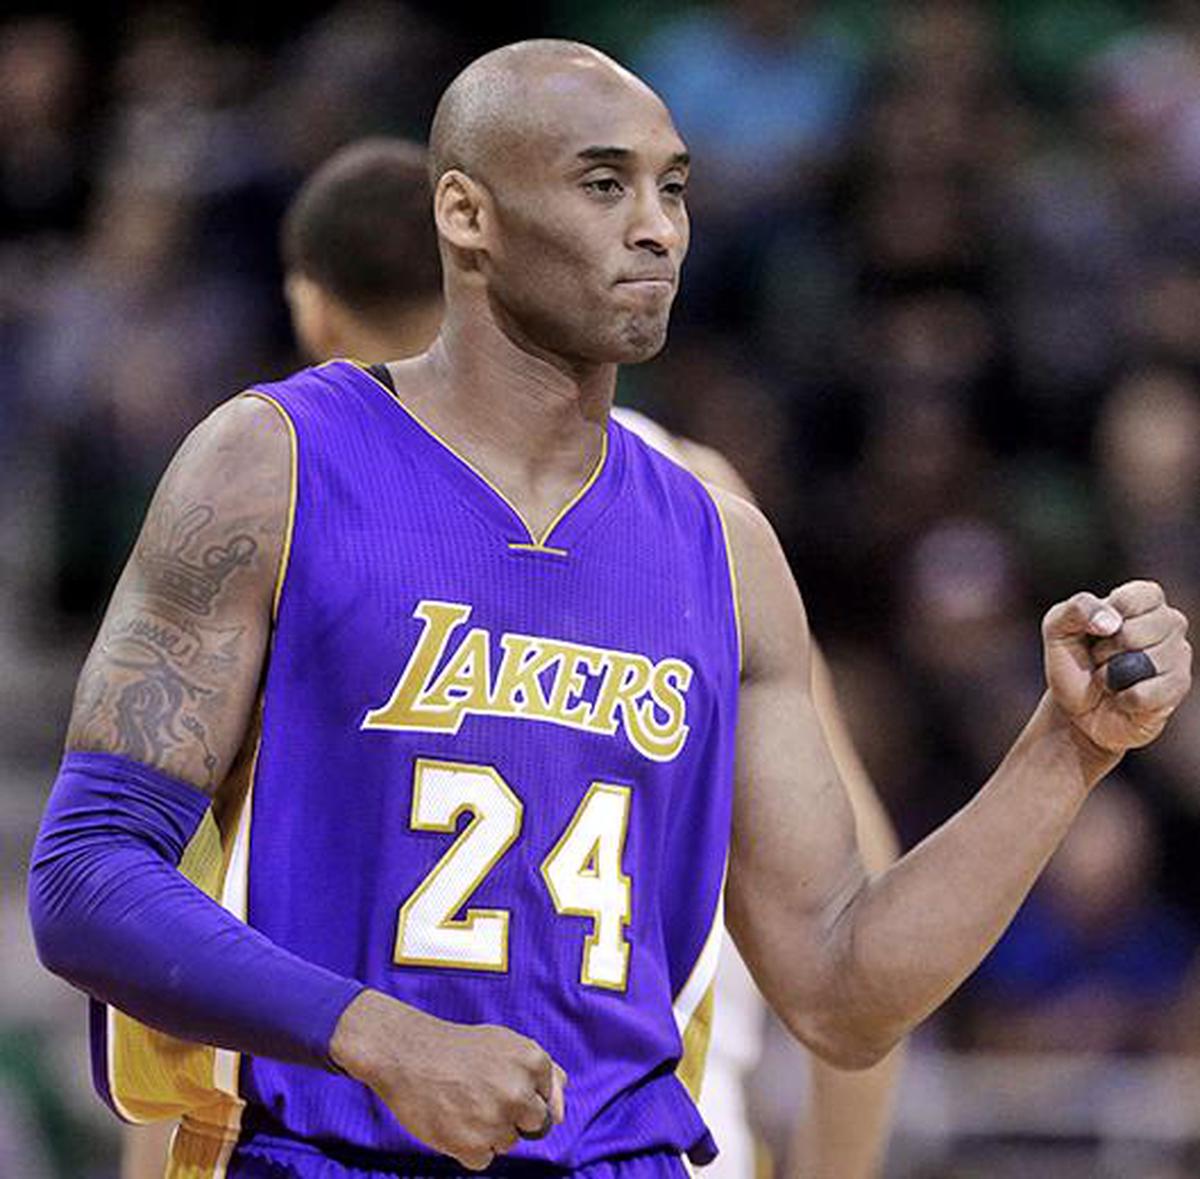 Rockets play through pain after Kobe Bryant's death